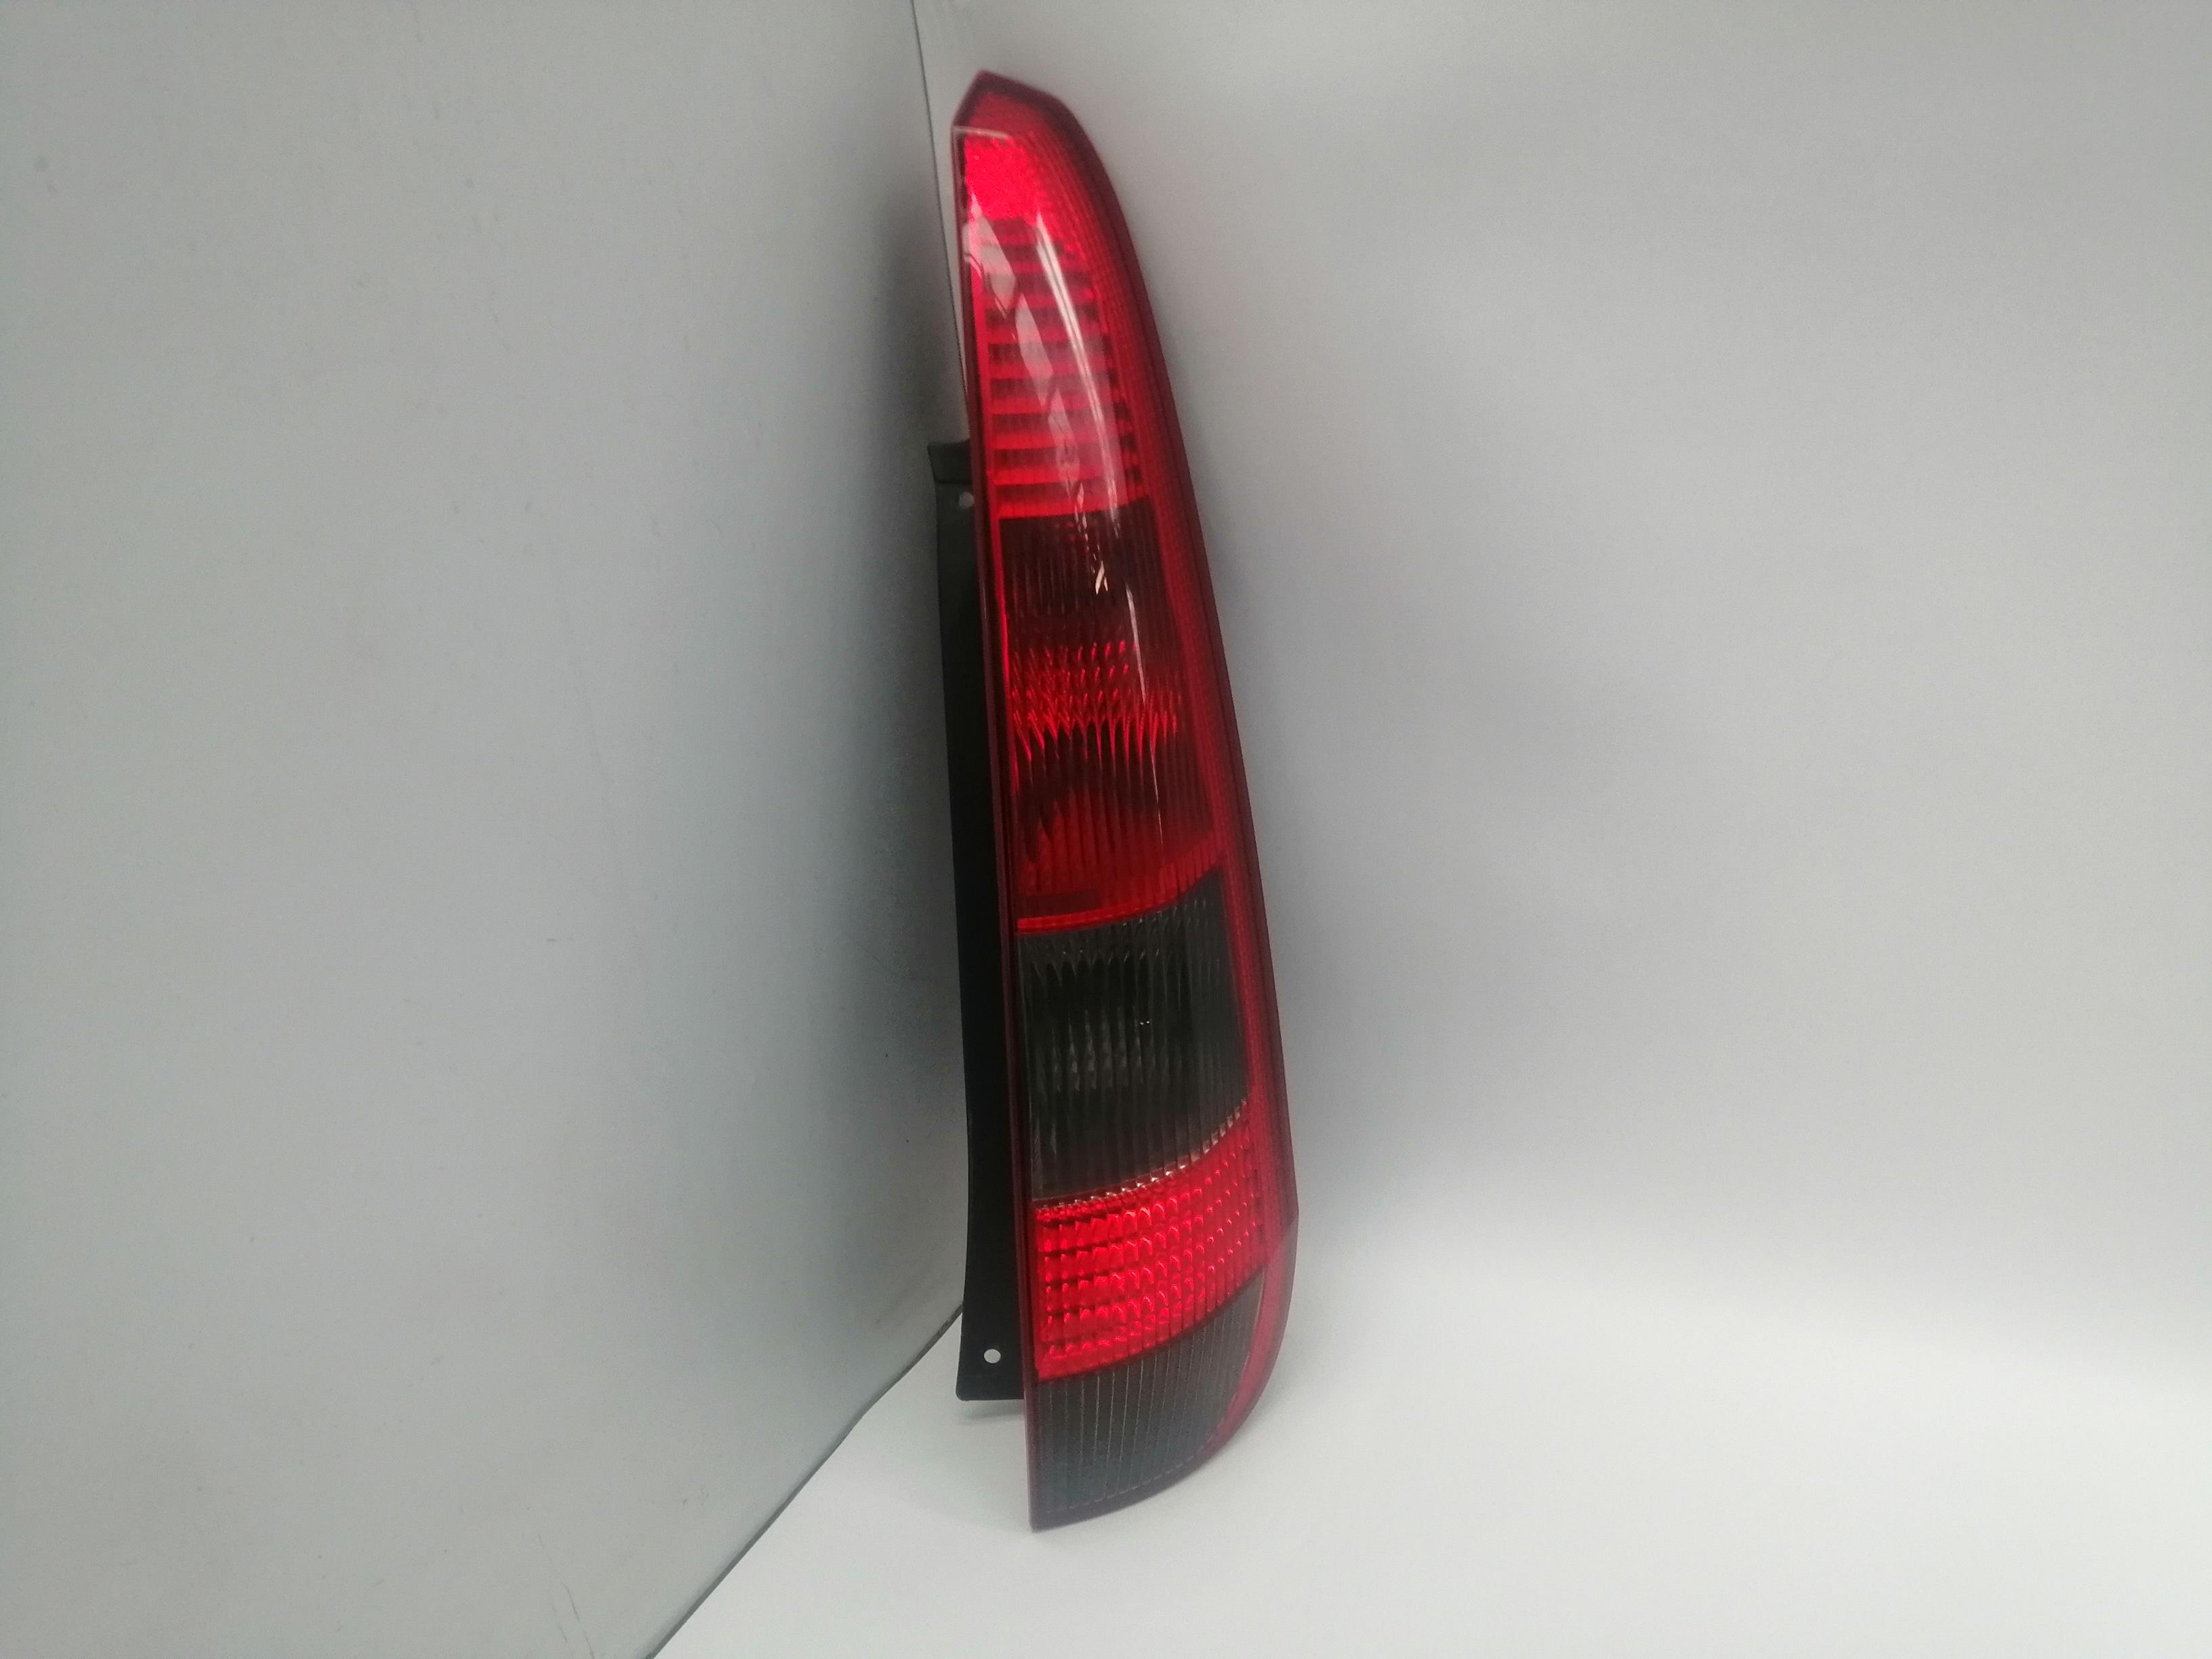 FORD Fiesta 5 generation (2001-2010) Rear Right Taillight Lamp 1251792, 2S6113N004AC 24027489